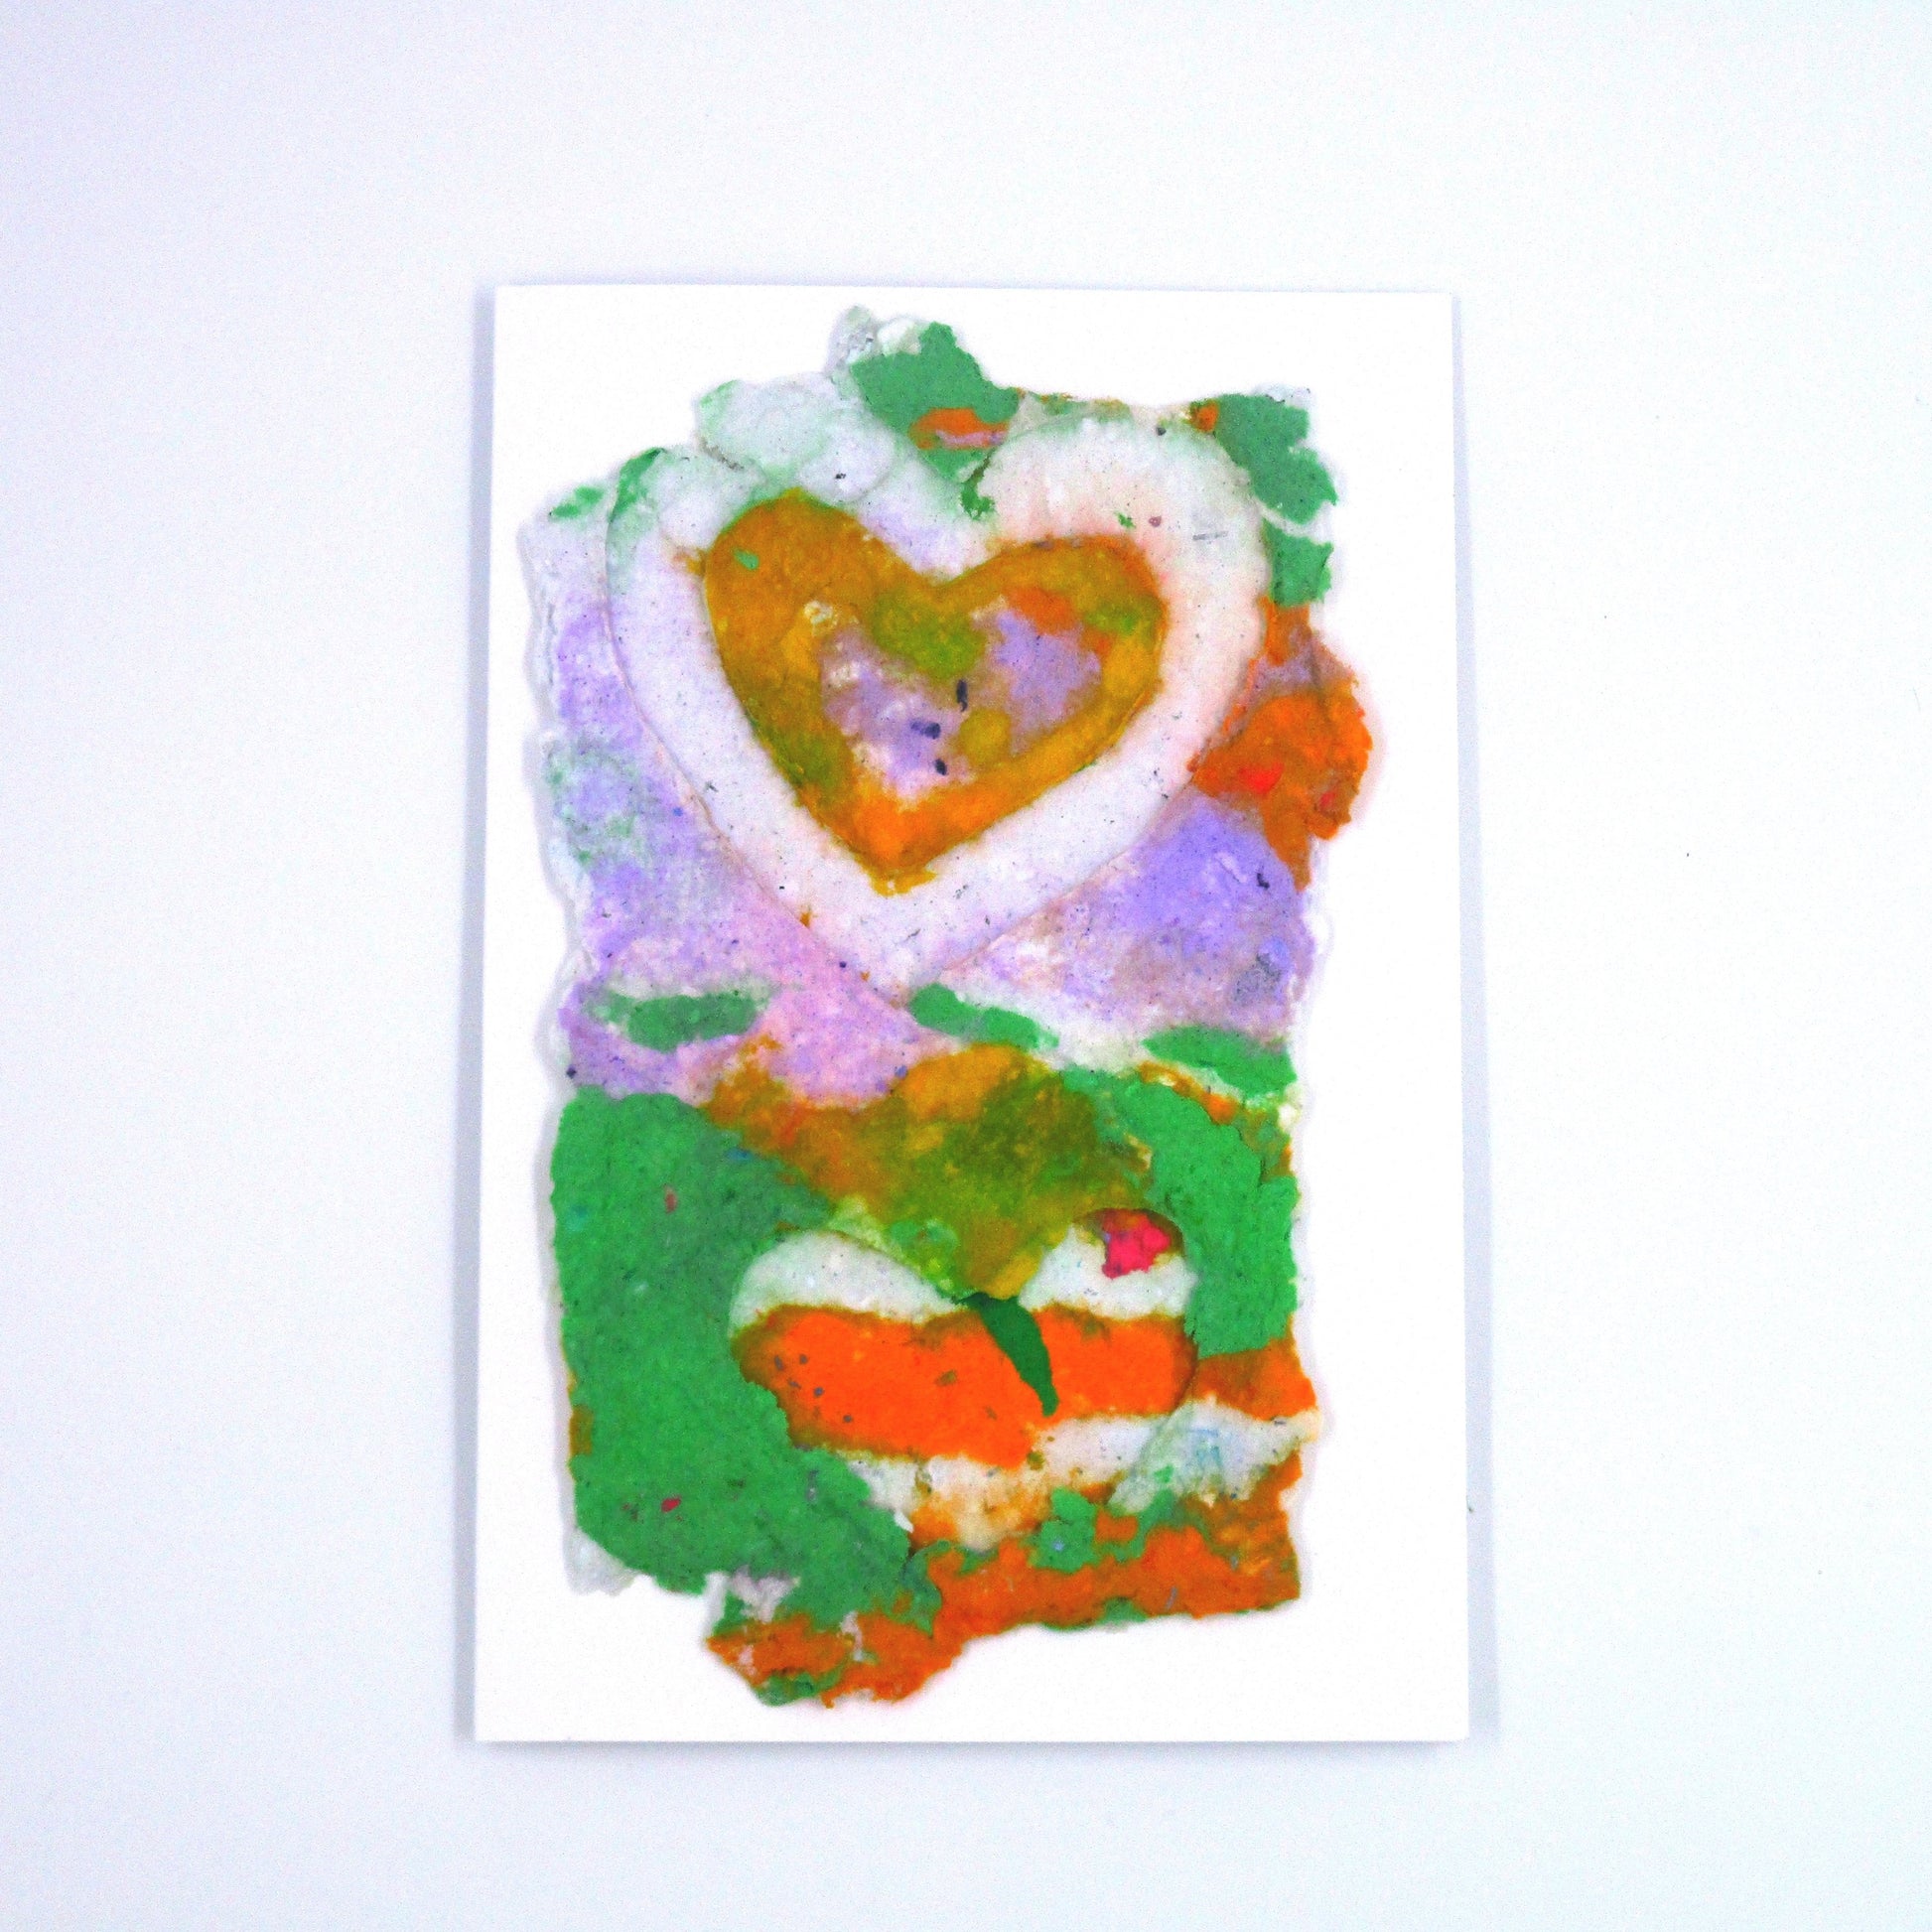 Handmade paper  greeting card with purple, orange and green colors and a white and yellow heart